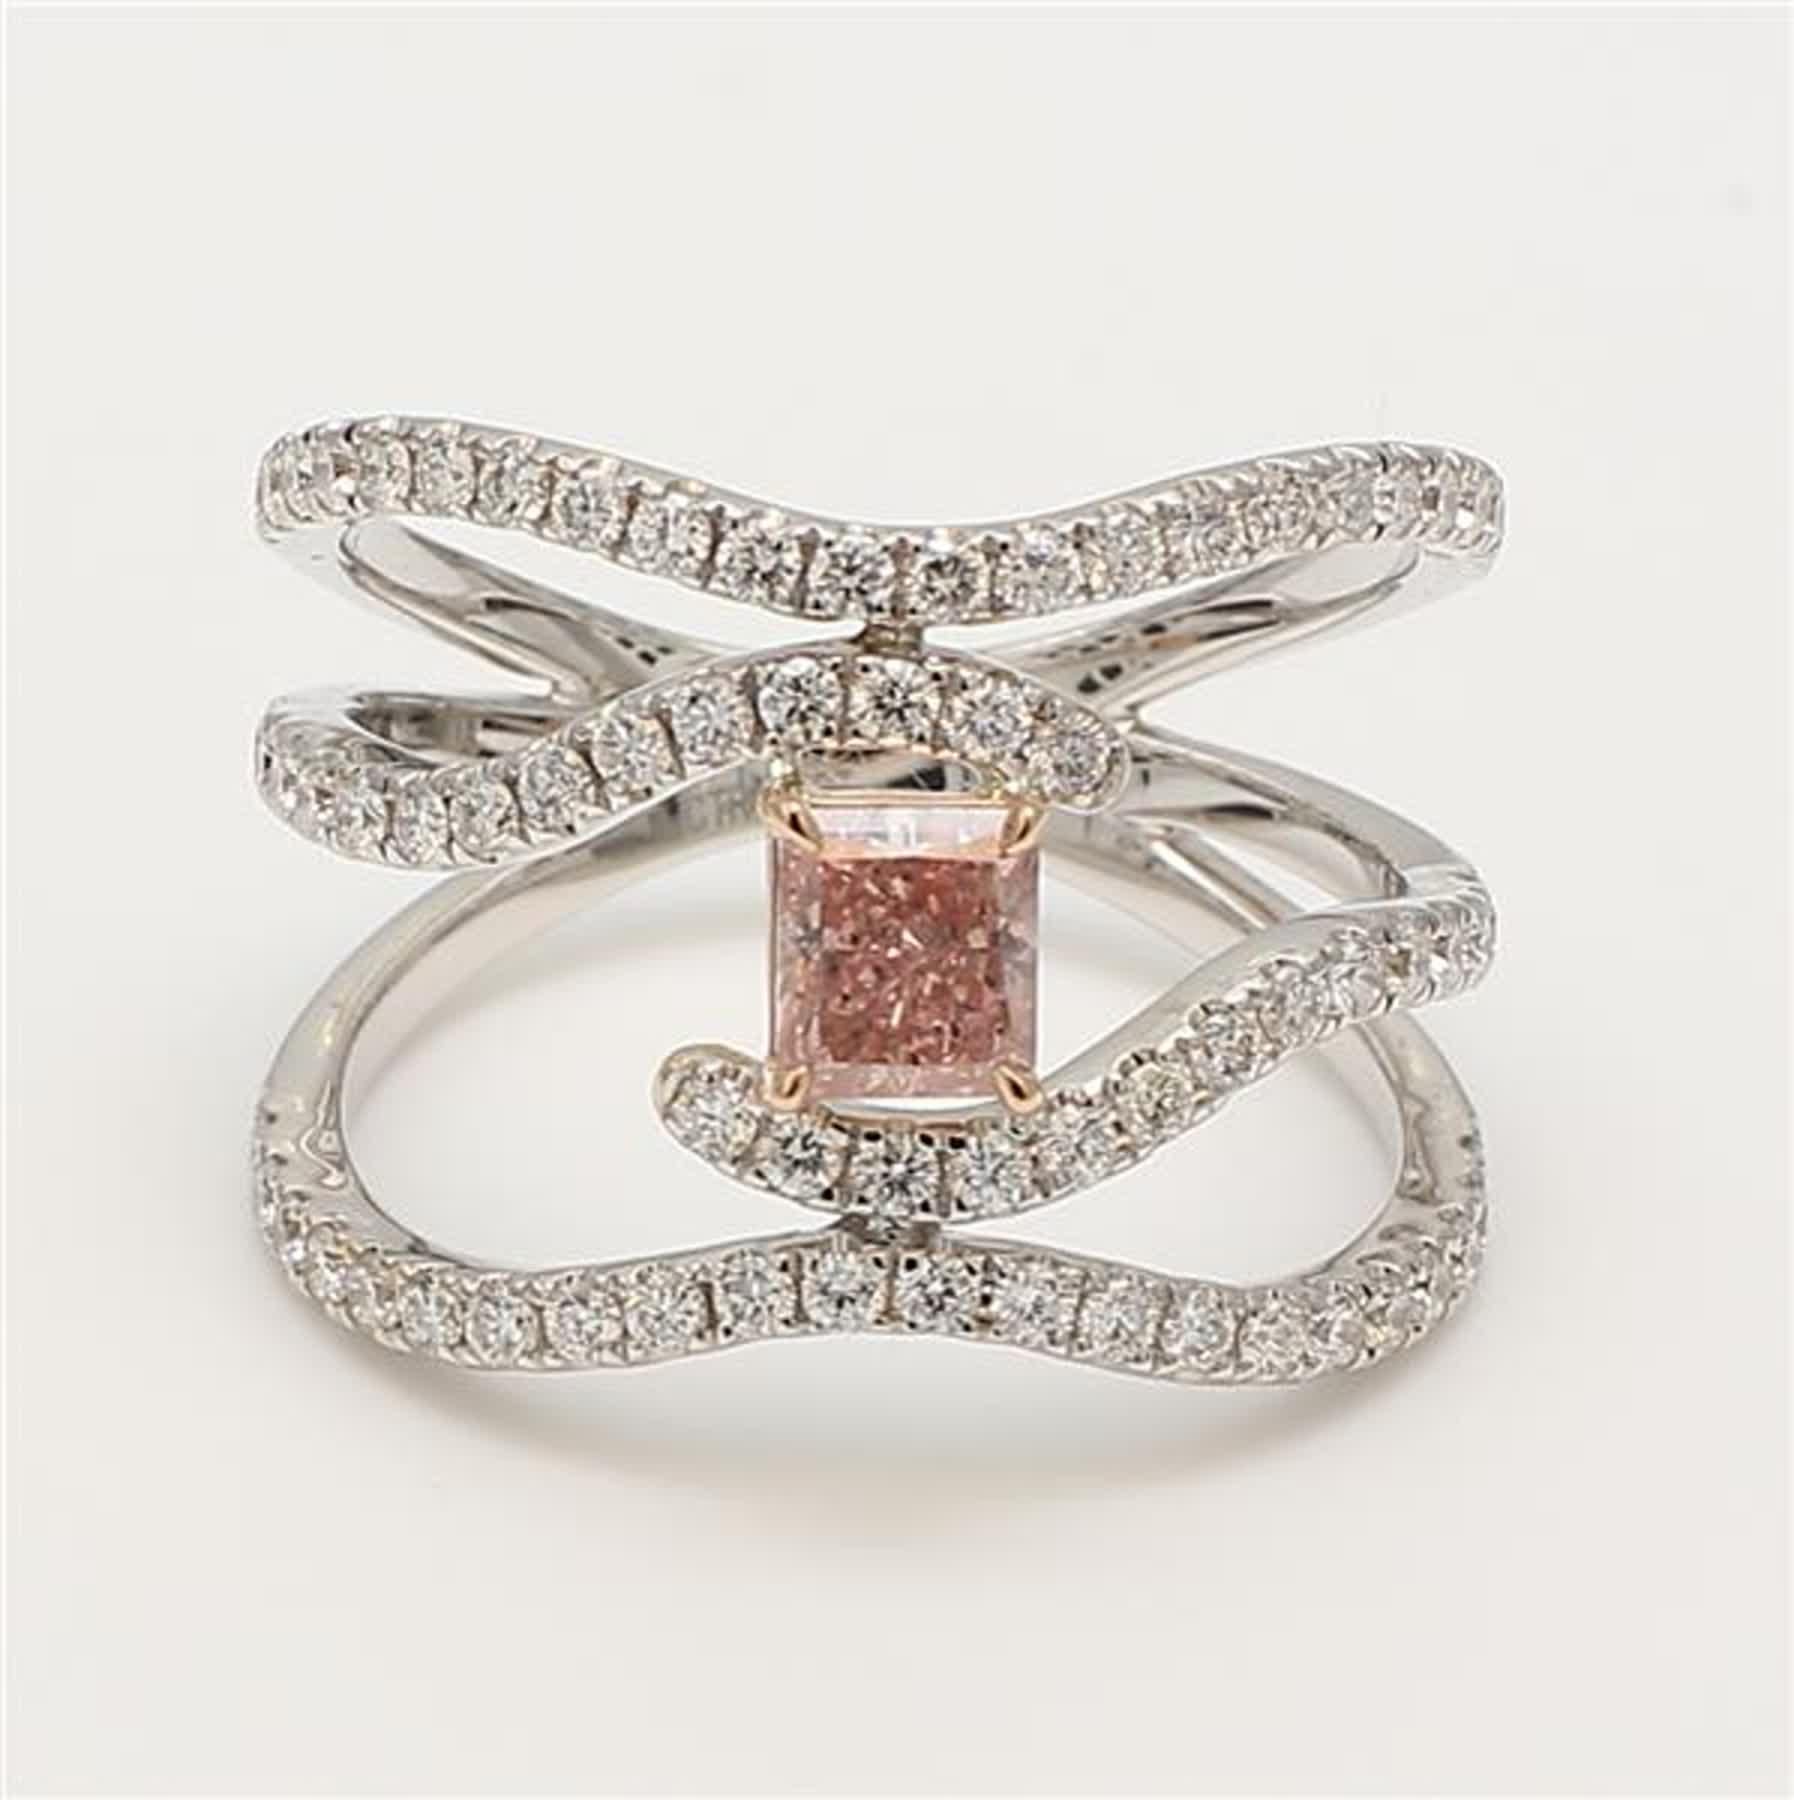 RareGemWorld's classic GIA certified diamond ring. Mounted in a beautiful 18K Rose and White Gold setting with a natural radiant cut pink diamond. The pink diamond is surrounded by round natural white diamond melee. This ring is guaranteed to